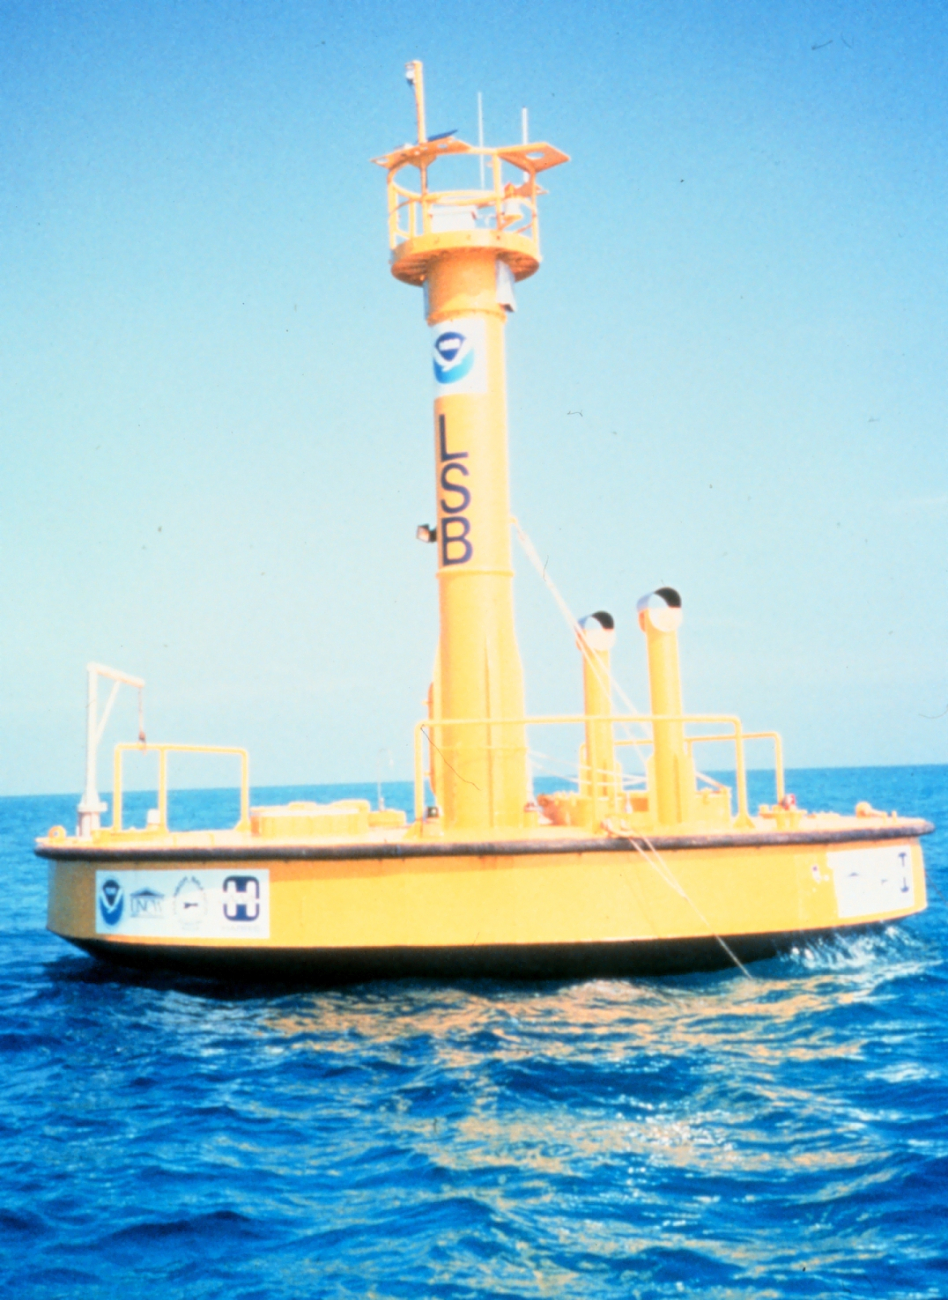 Monster buoy stands watch and delivers life support to AQUARIUS